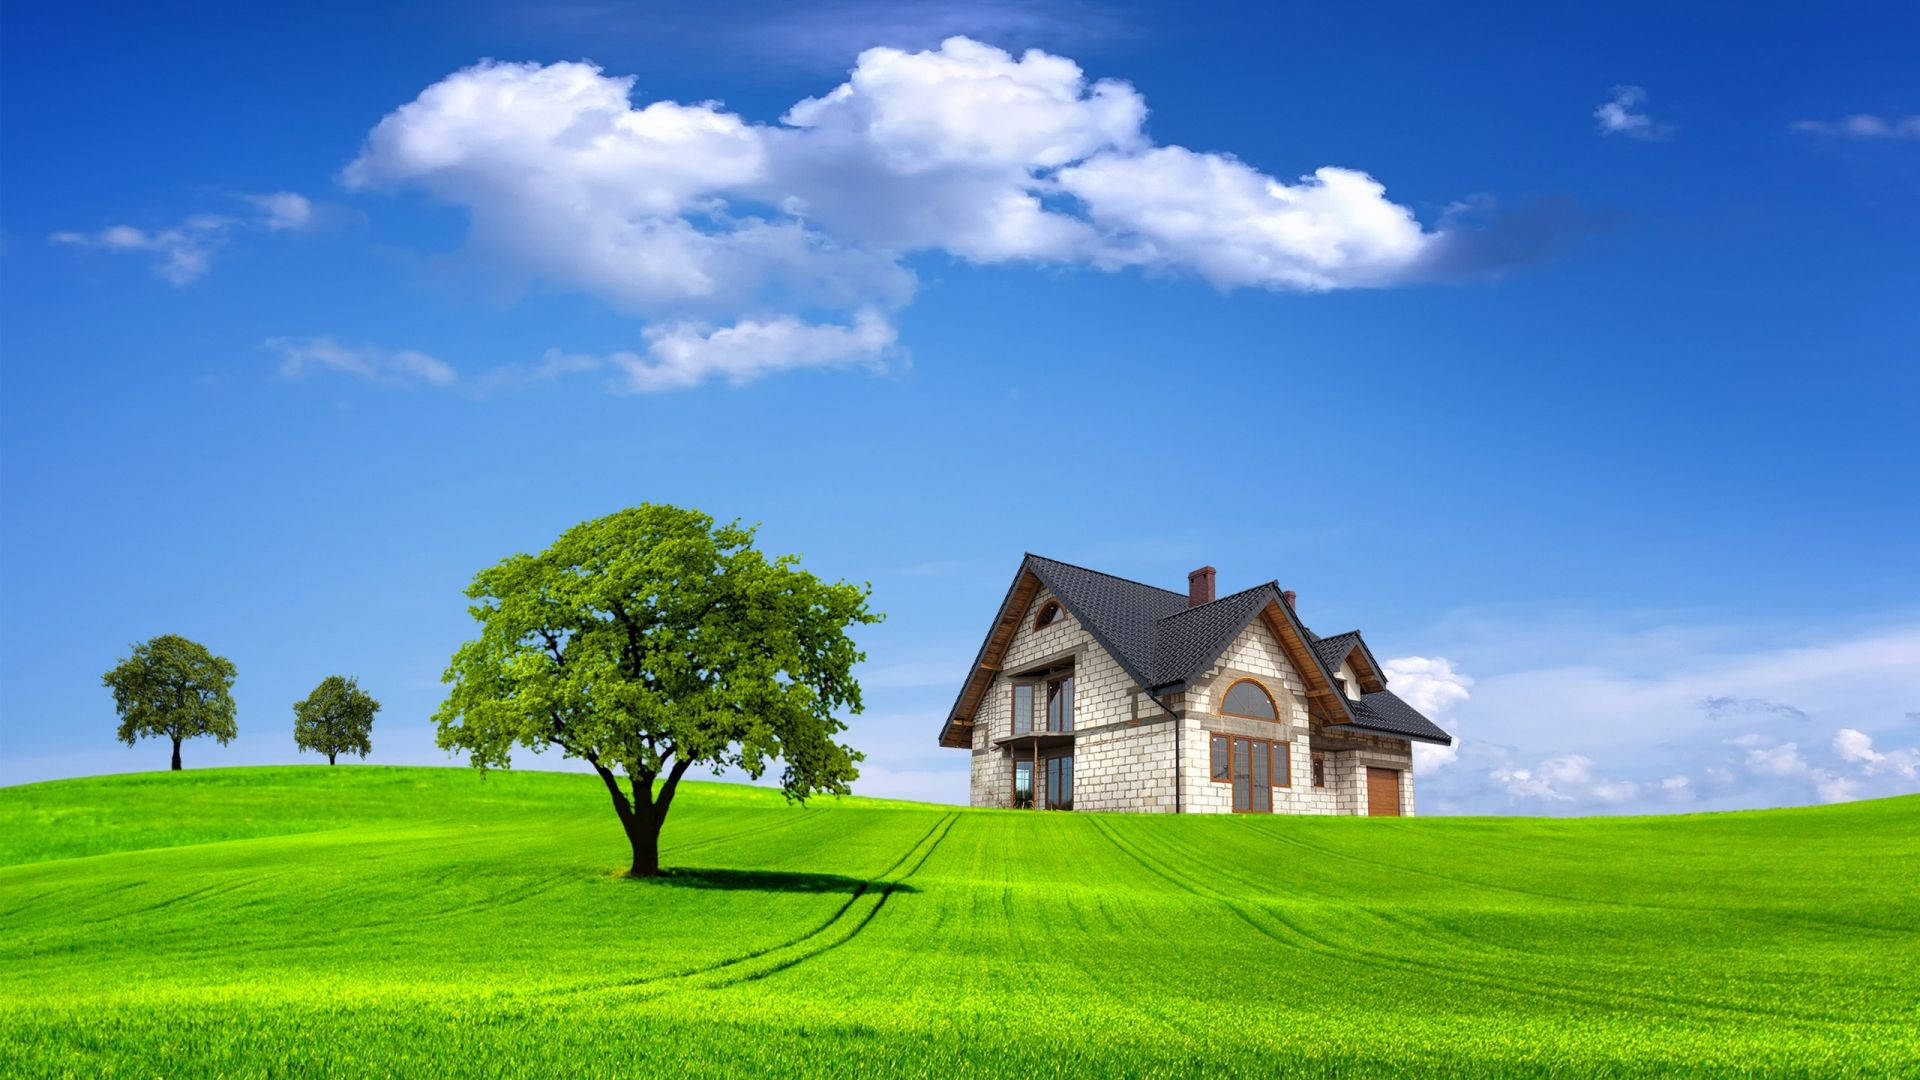 HD wallpaper of house standing on green field during bright day. 